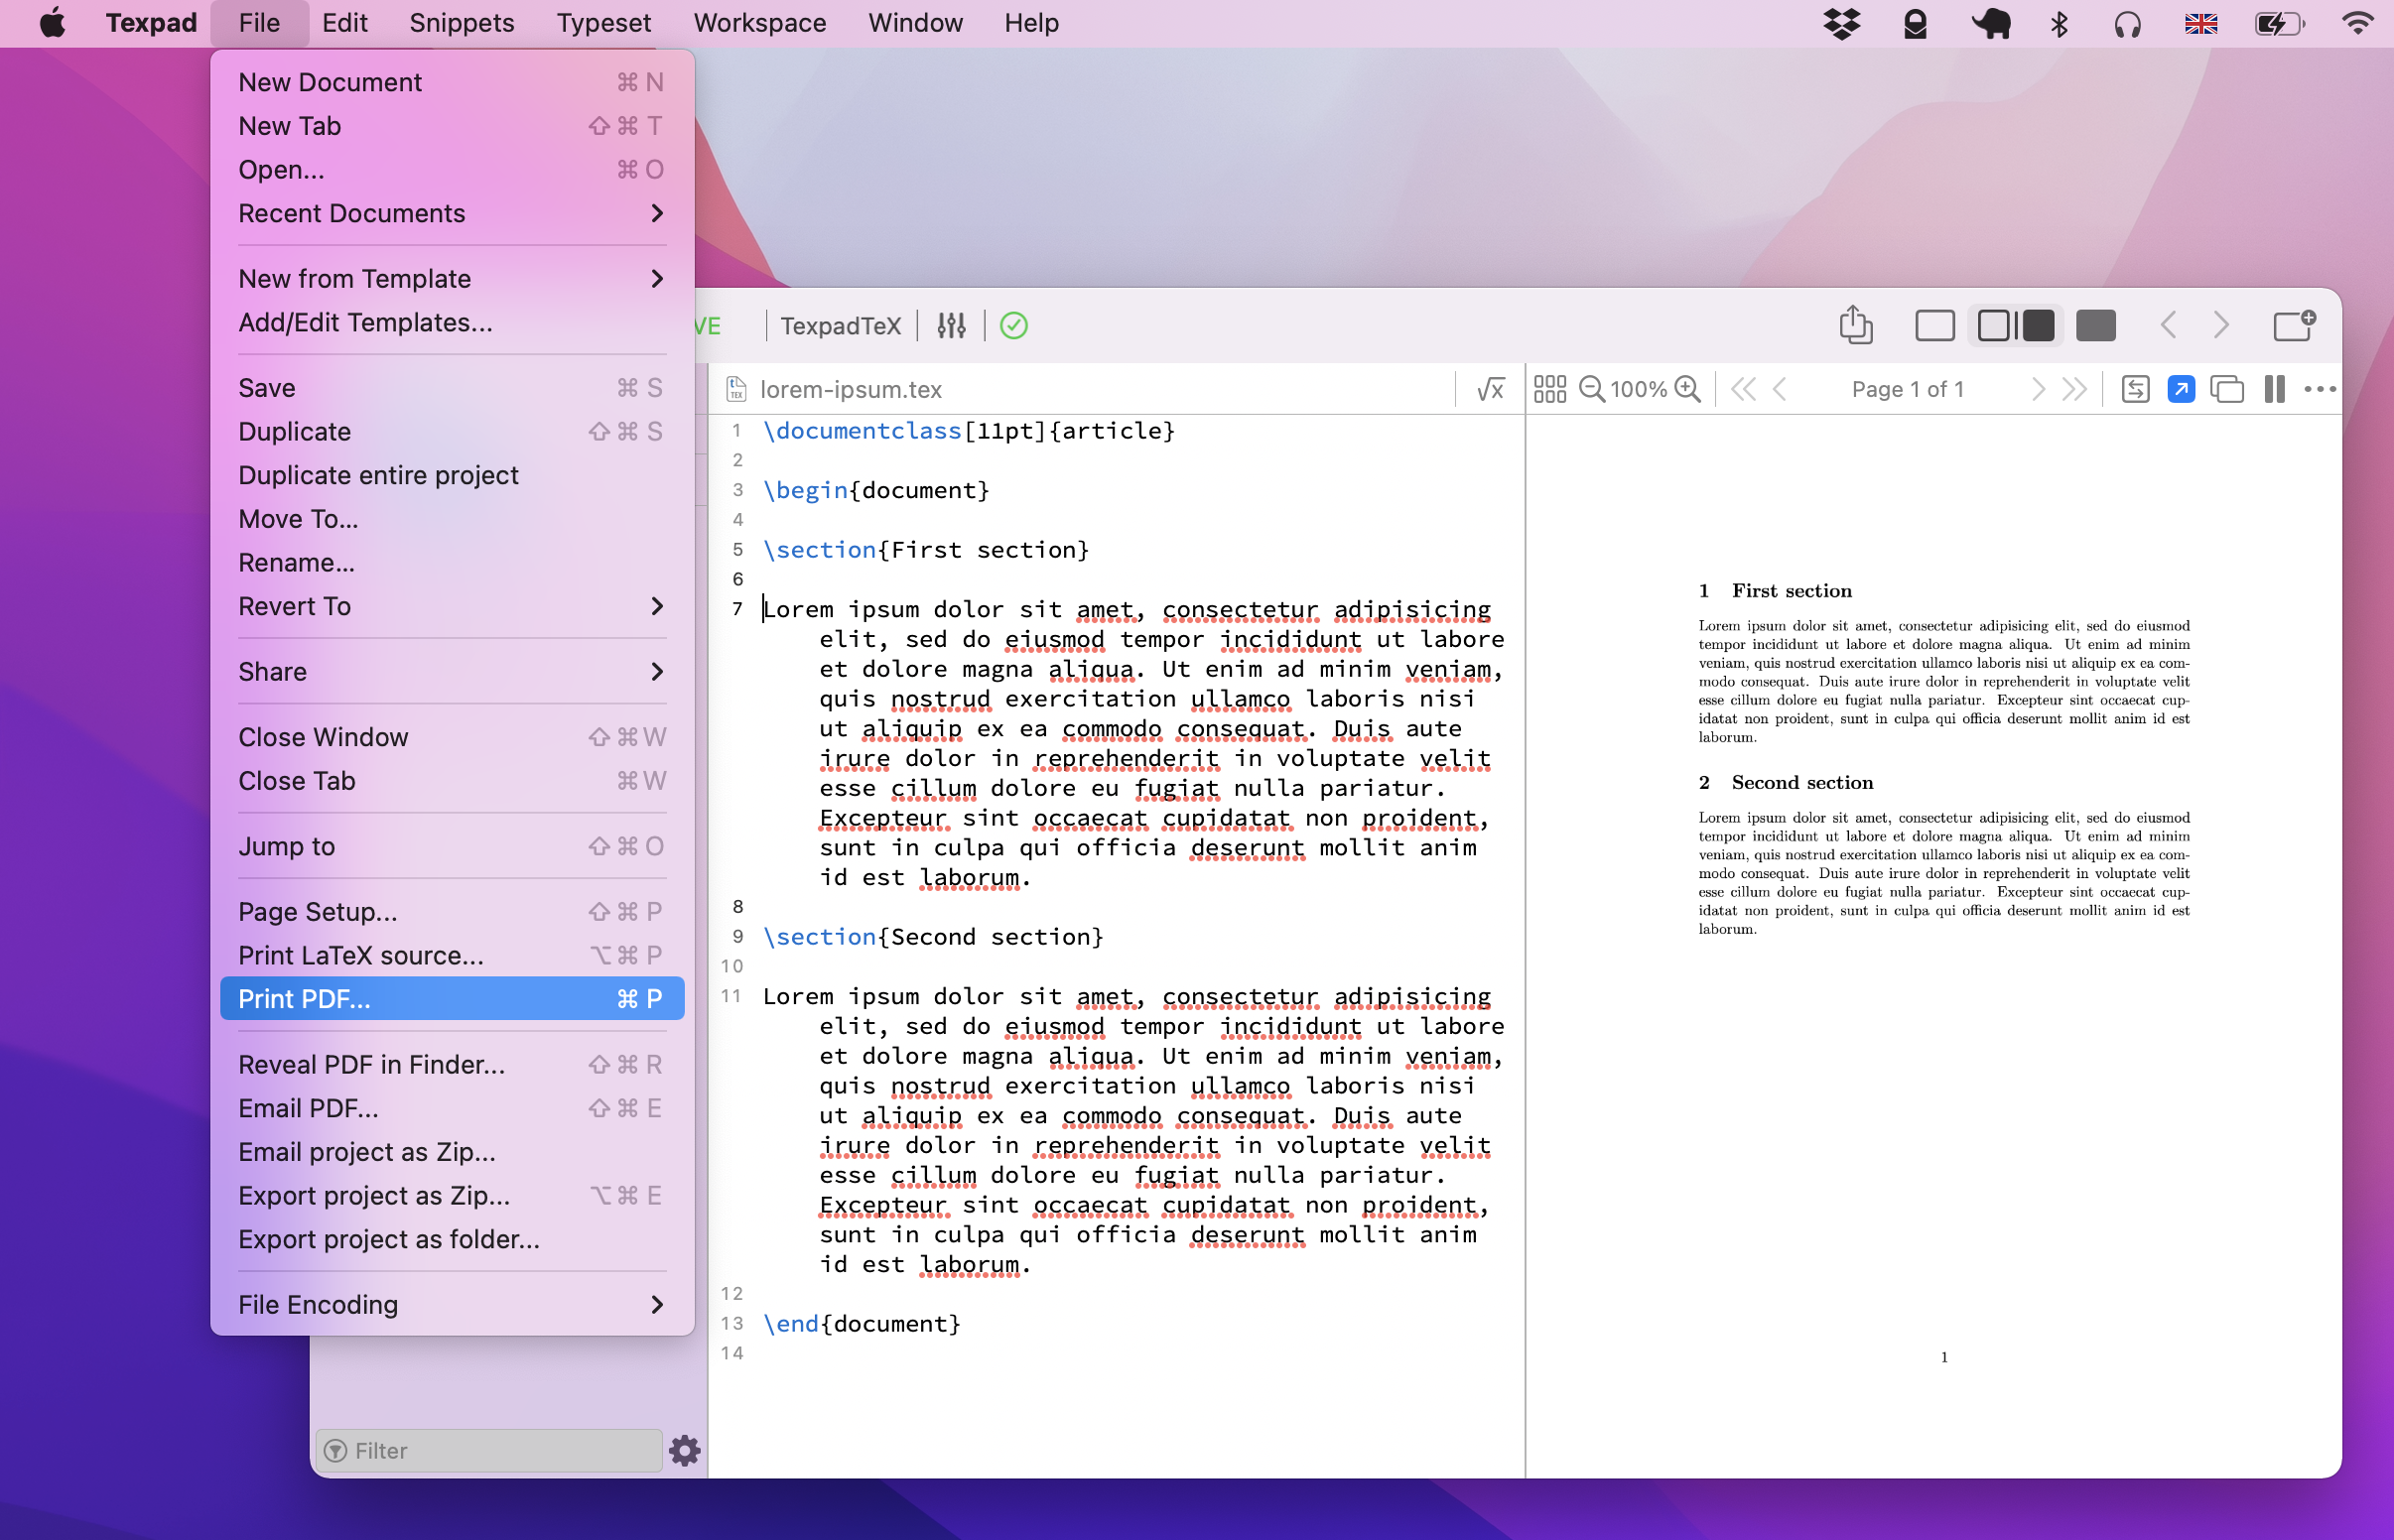 docs/apps/workspace/document-viewer/printing/macos/file-menu-with-print-pdf-highlighted.png